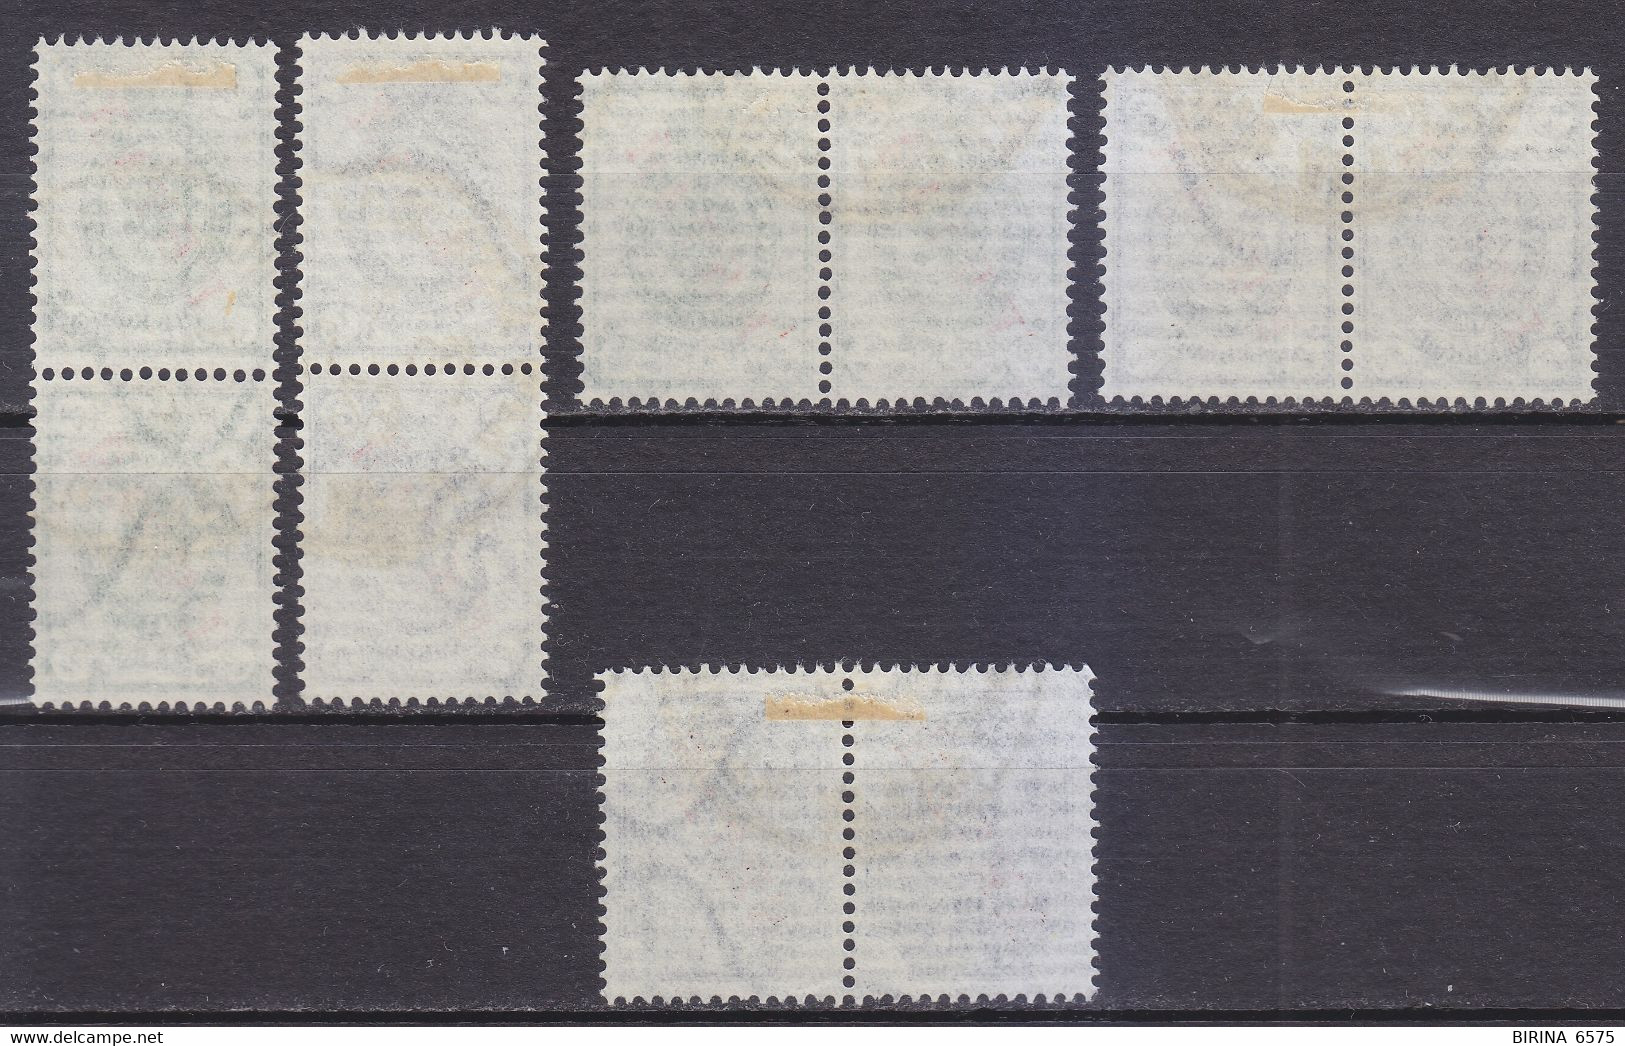 Russian PO In China. 1900 "Port Arthur" Cancellation. 5 Pairs - M - Cina